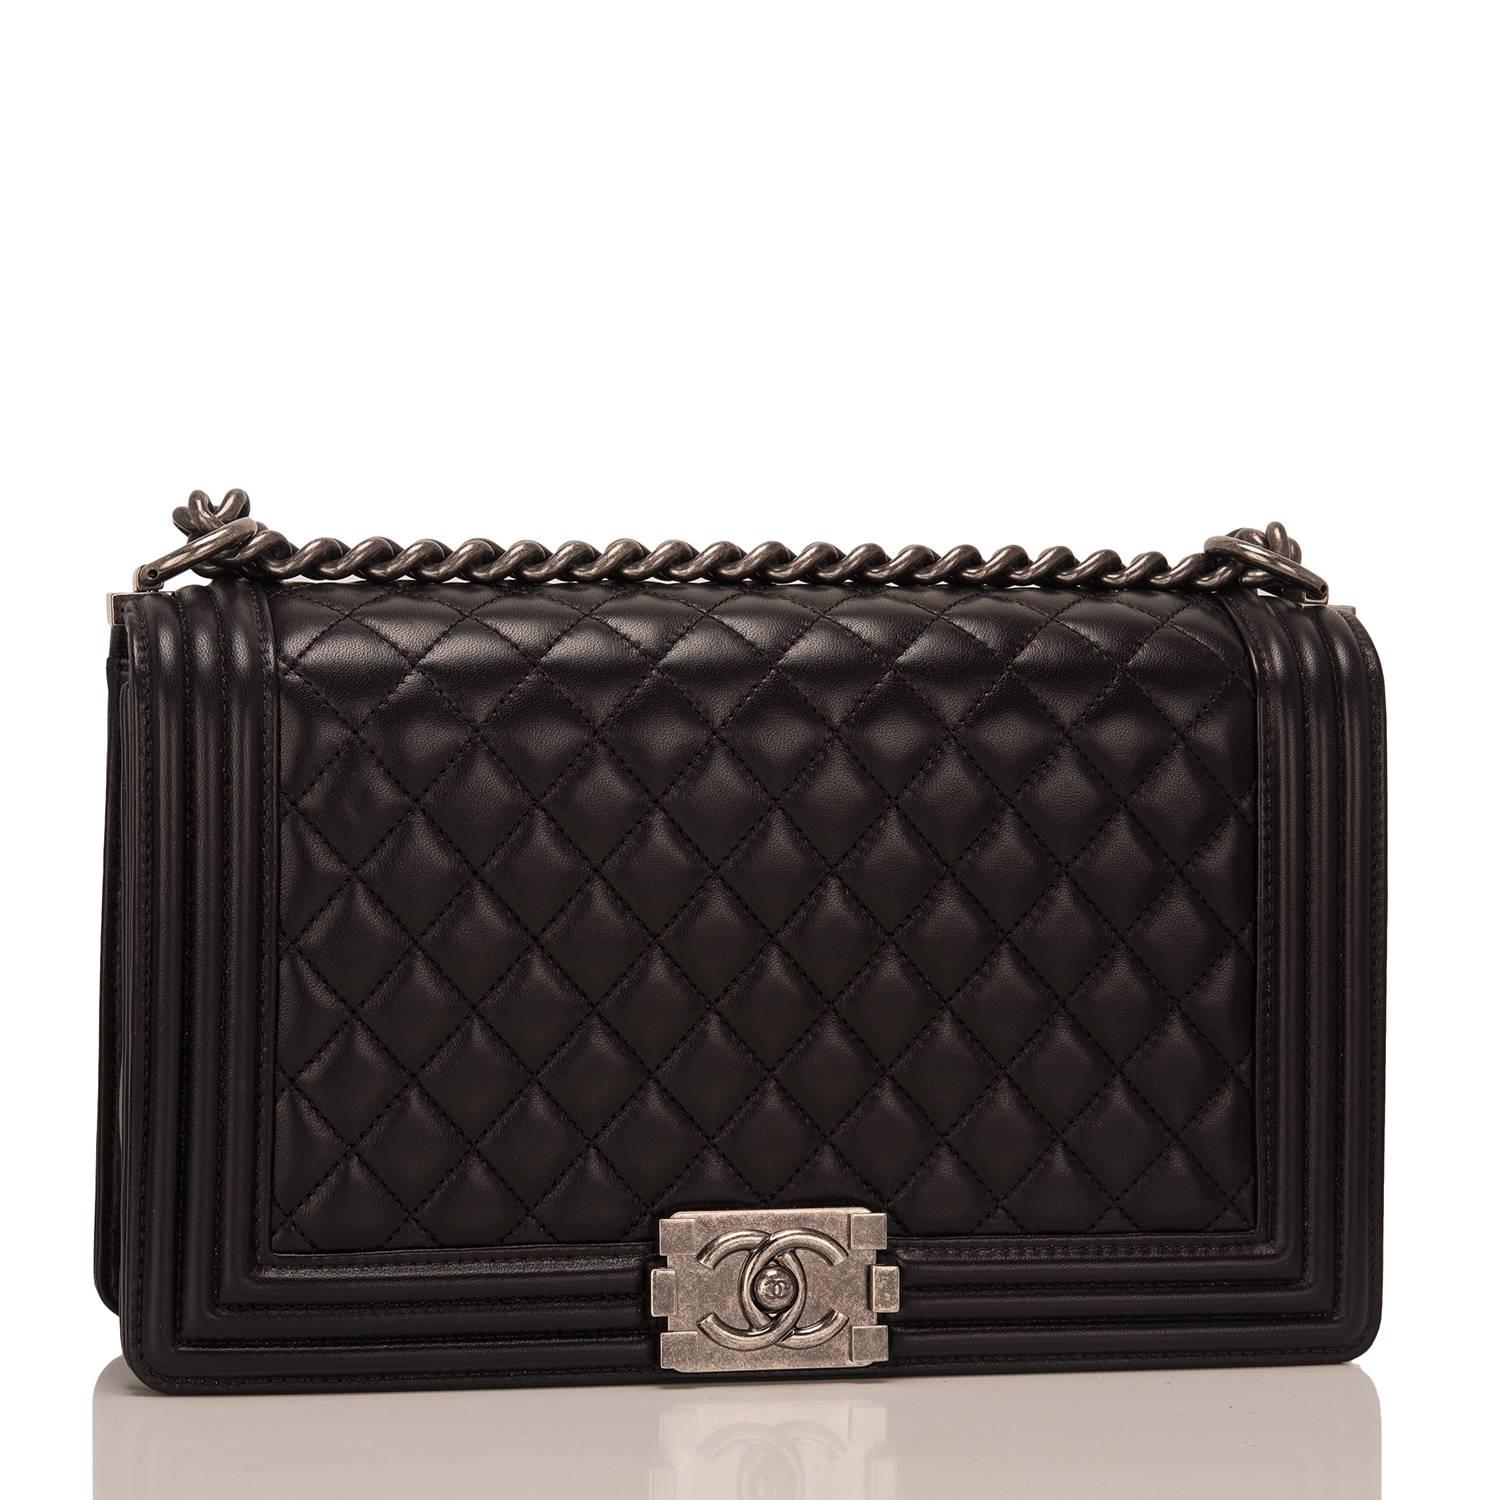 Chanel New Medium Boy bag of black lambskin leather with aged ruthenium hardware.

This bag features a full front flap with the Le Boy CC push lock closure and an aged ruthenium chain link and black leather padded shoulder/crossbody strap.

The